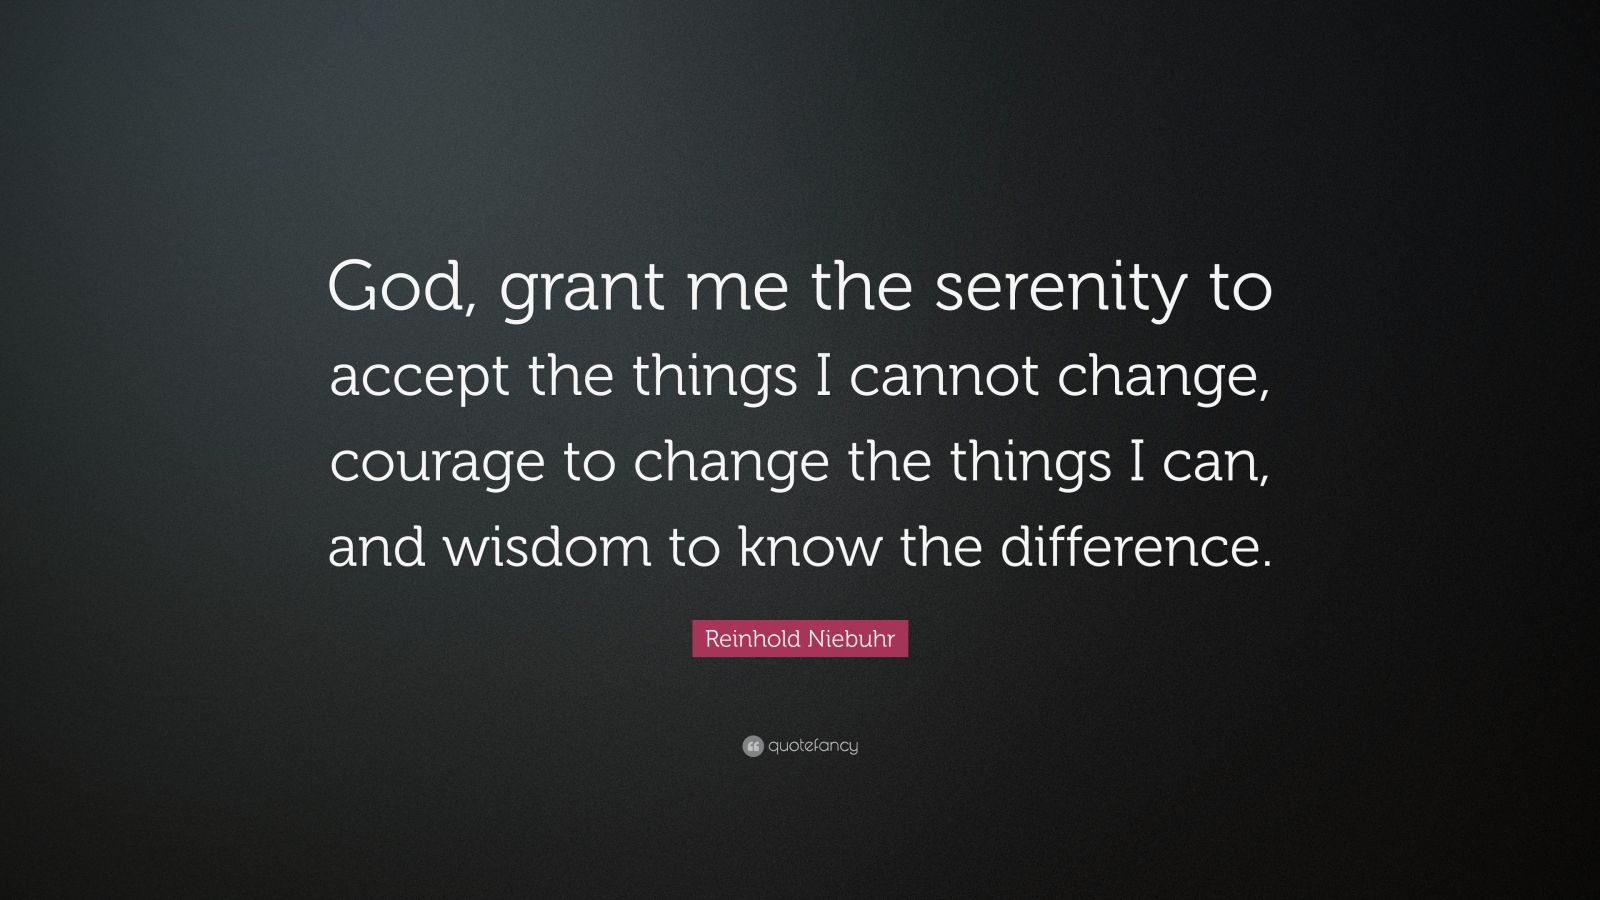 Reinhold Niebuhr Quote: "God grant me the serenity to ...